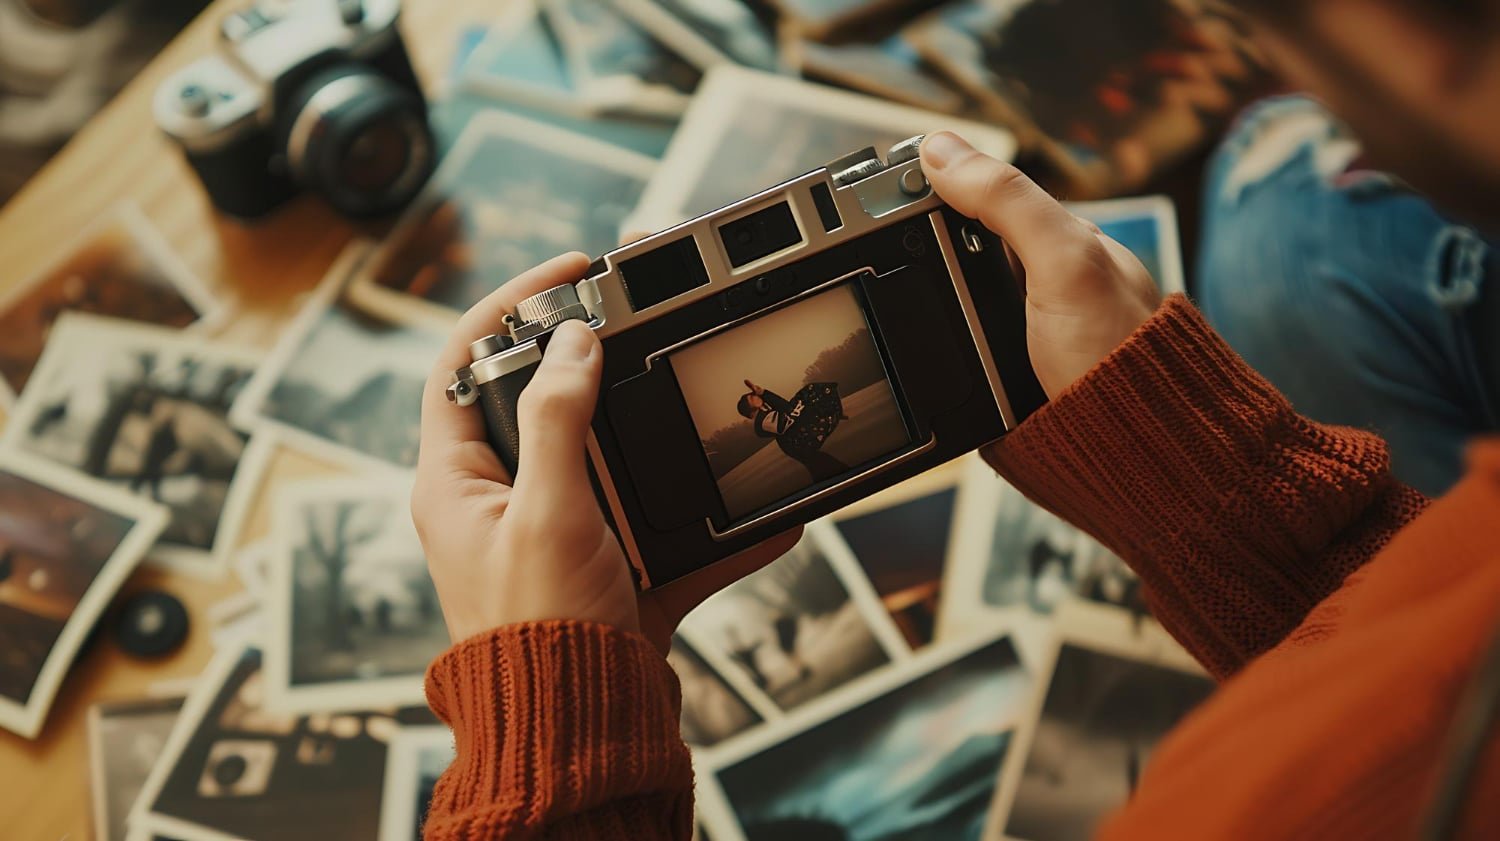 You are currently viewing Create Instant Memories With Polaroid’s Iconic Instant Cameras